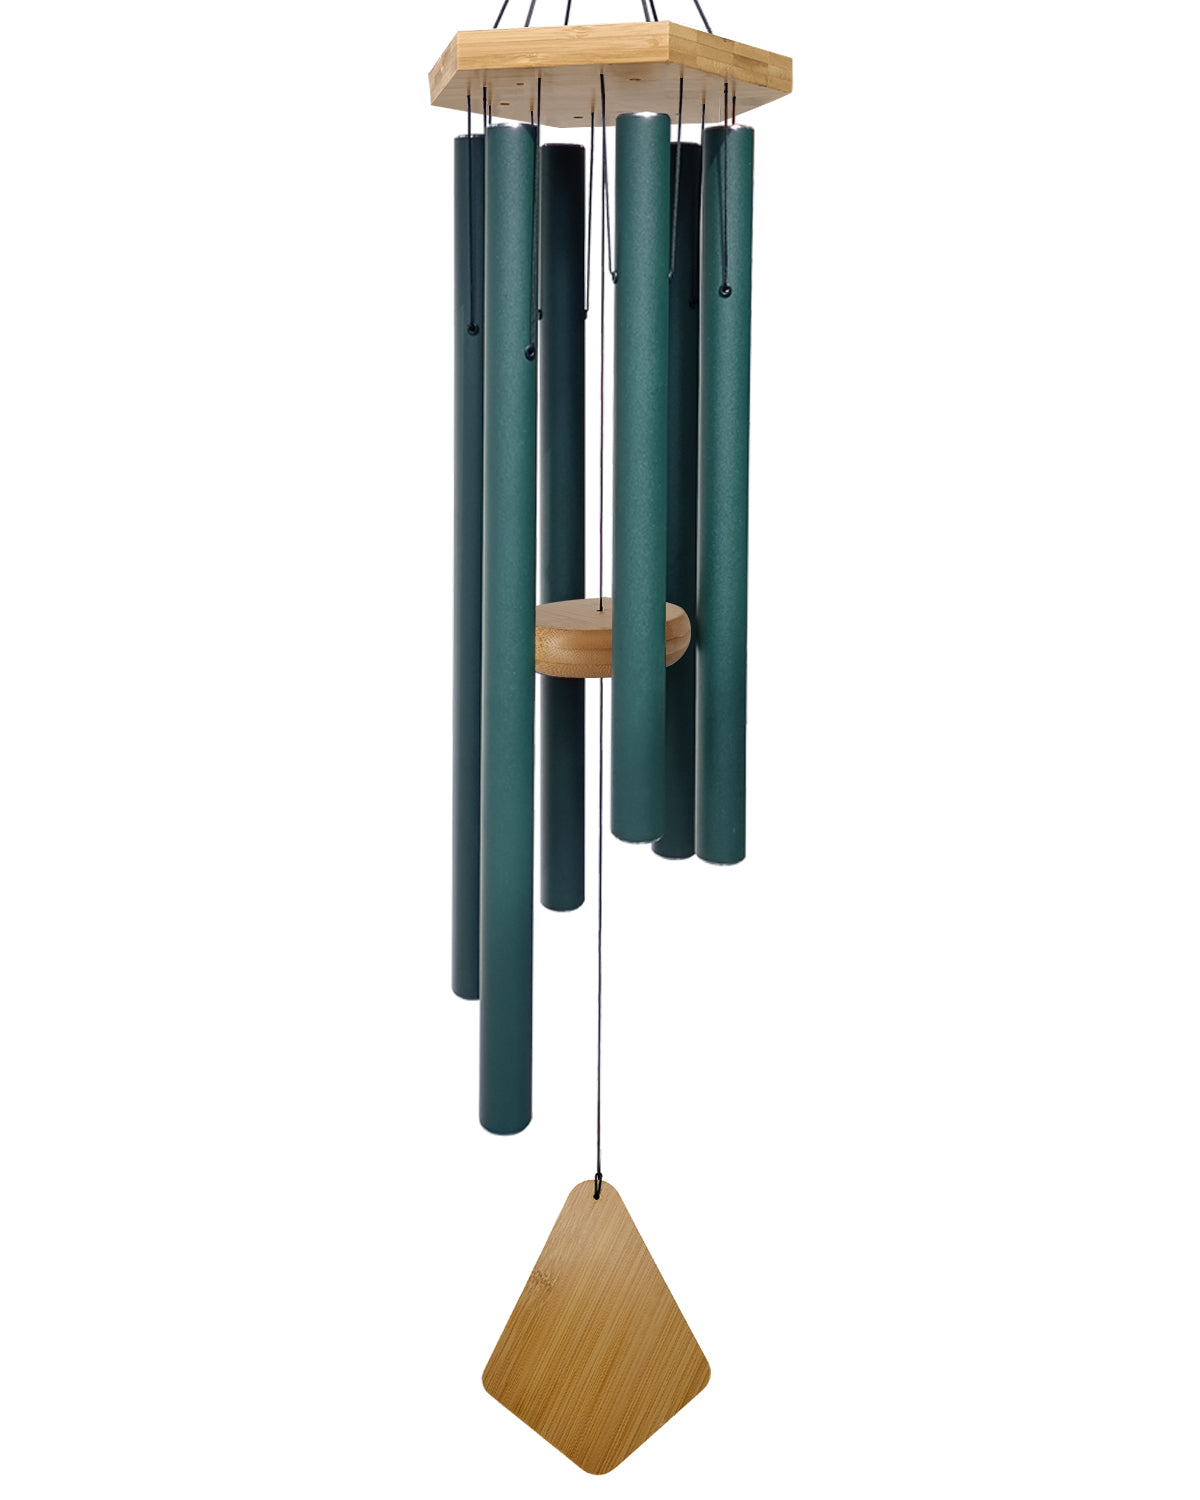 Howarmer 30 Inches Wind Chimes Outdoor, Memorial Wind Chimes with Hook as Gifts for Mother's Day/Housewarming/Christmas, Patio, Garden, Yard, Home Decor.